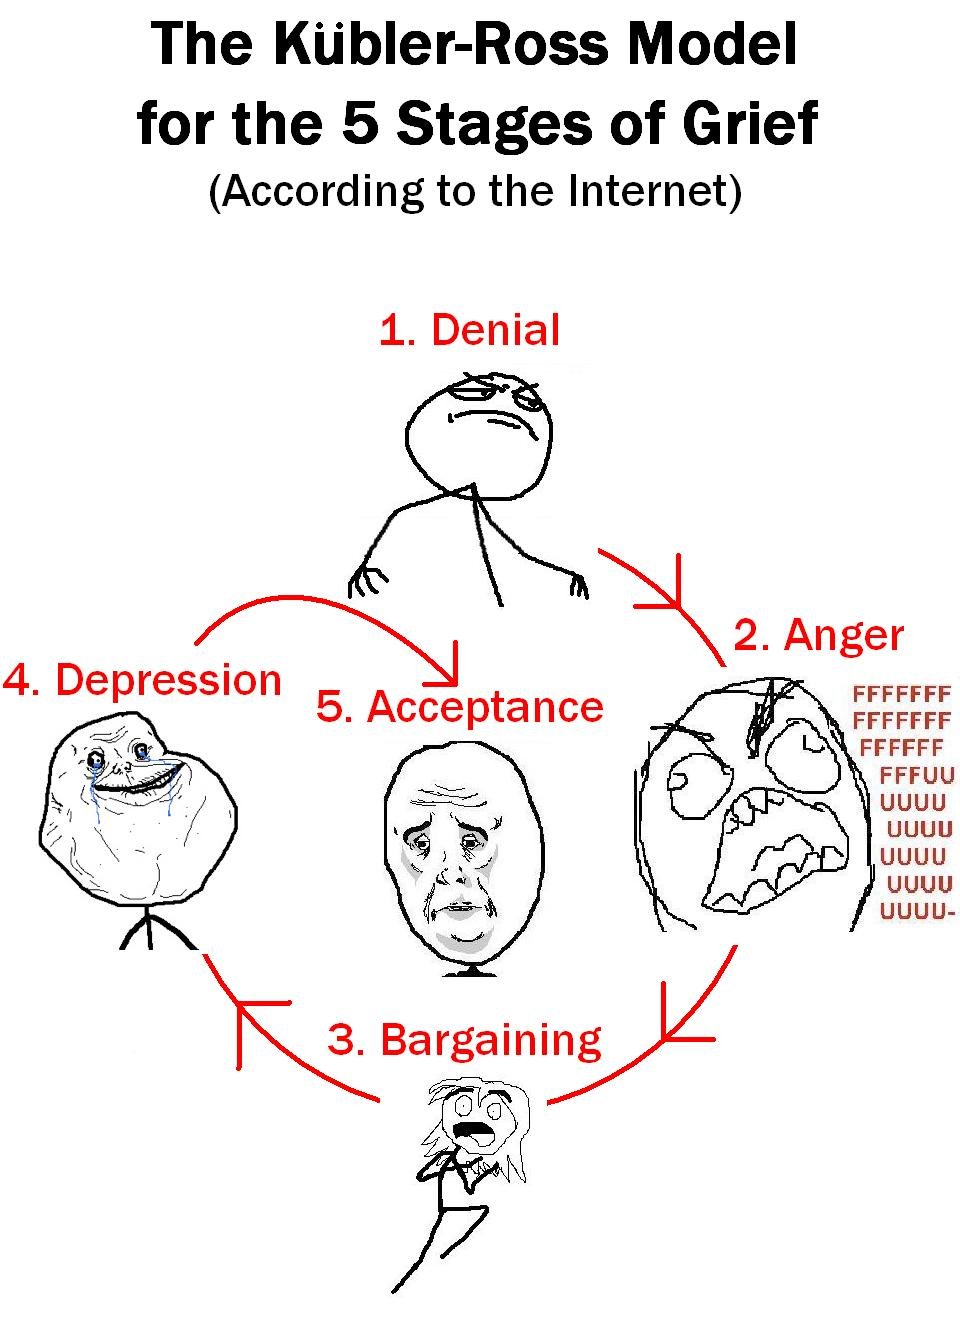 5 stages of grief.